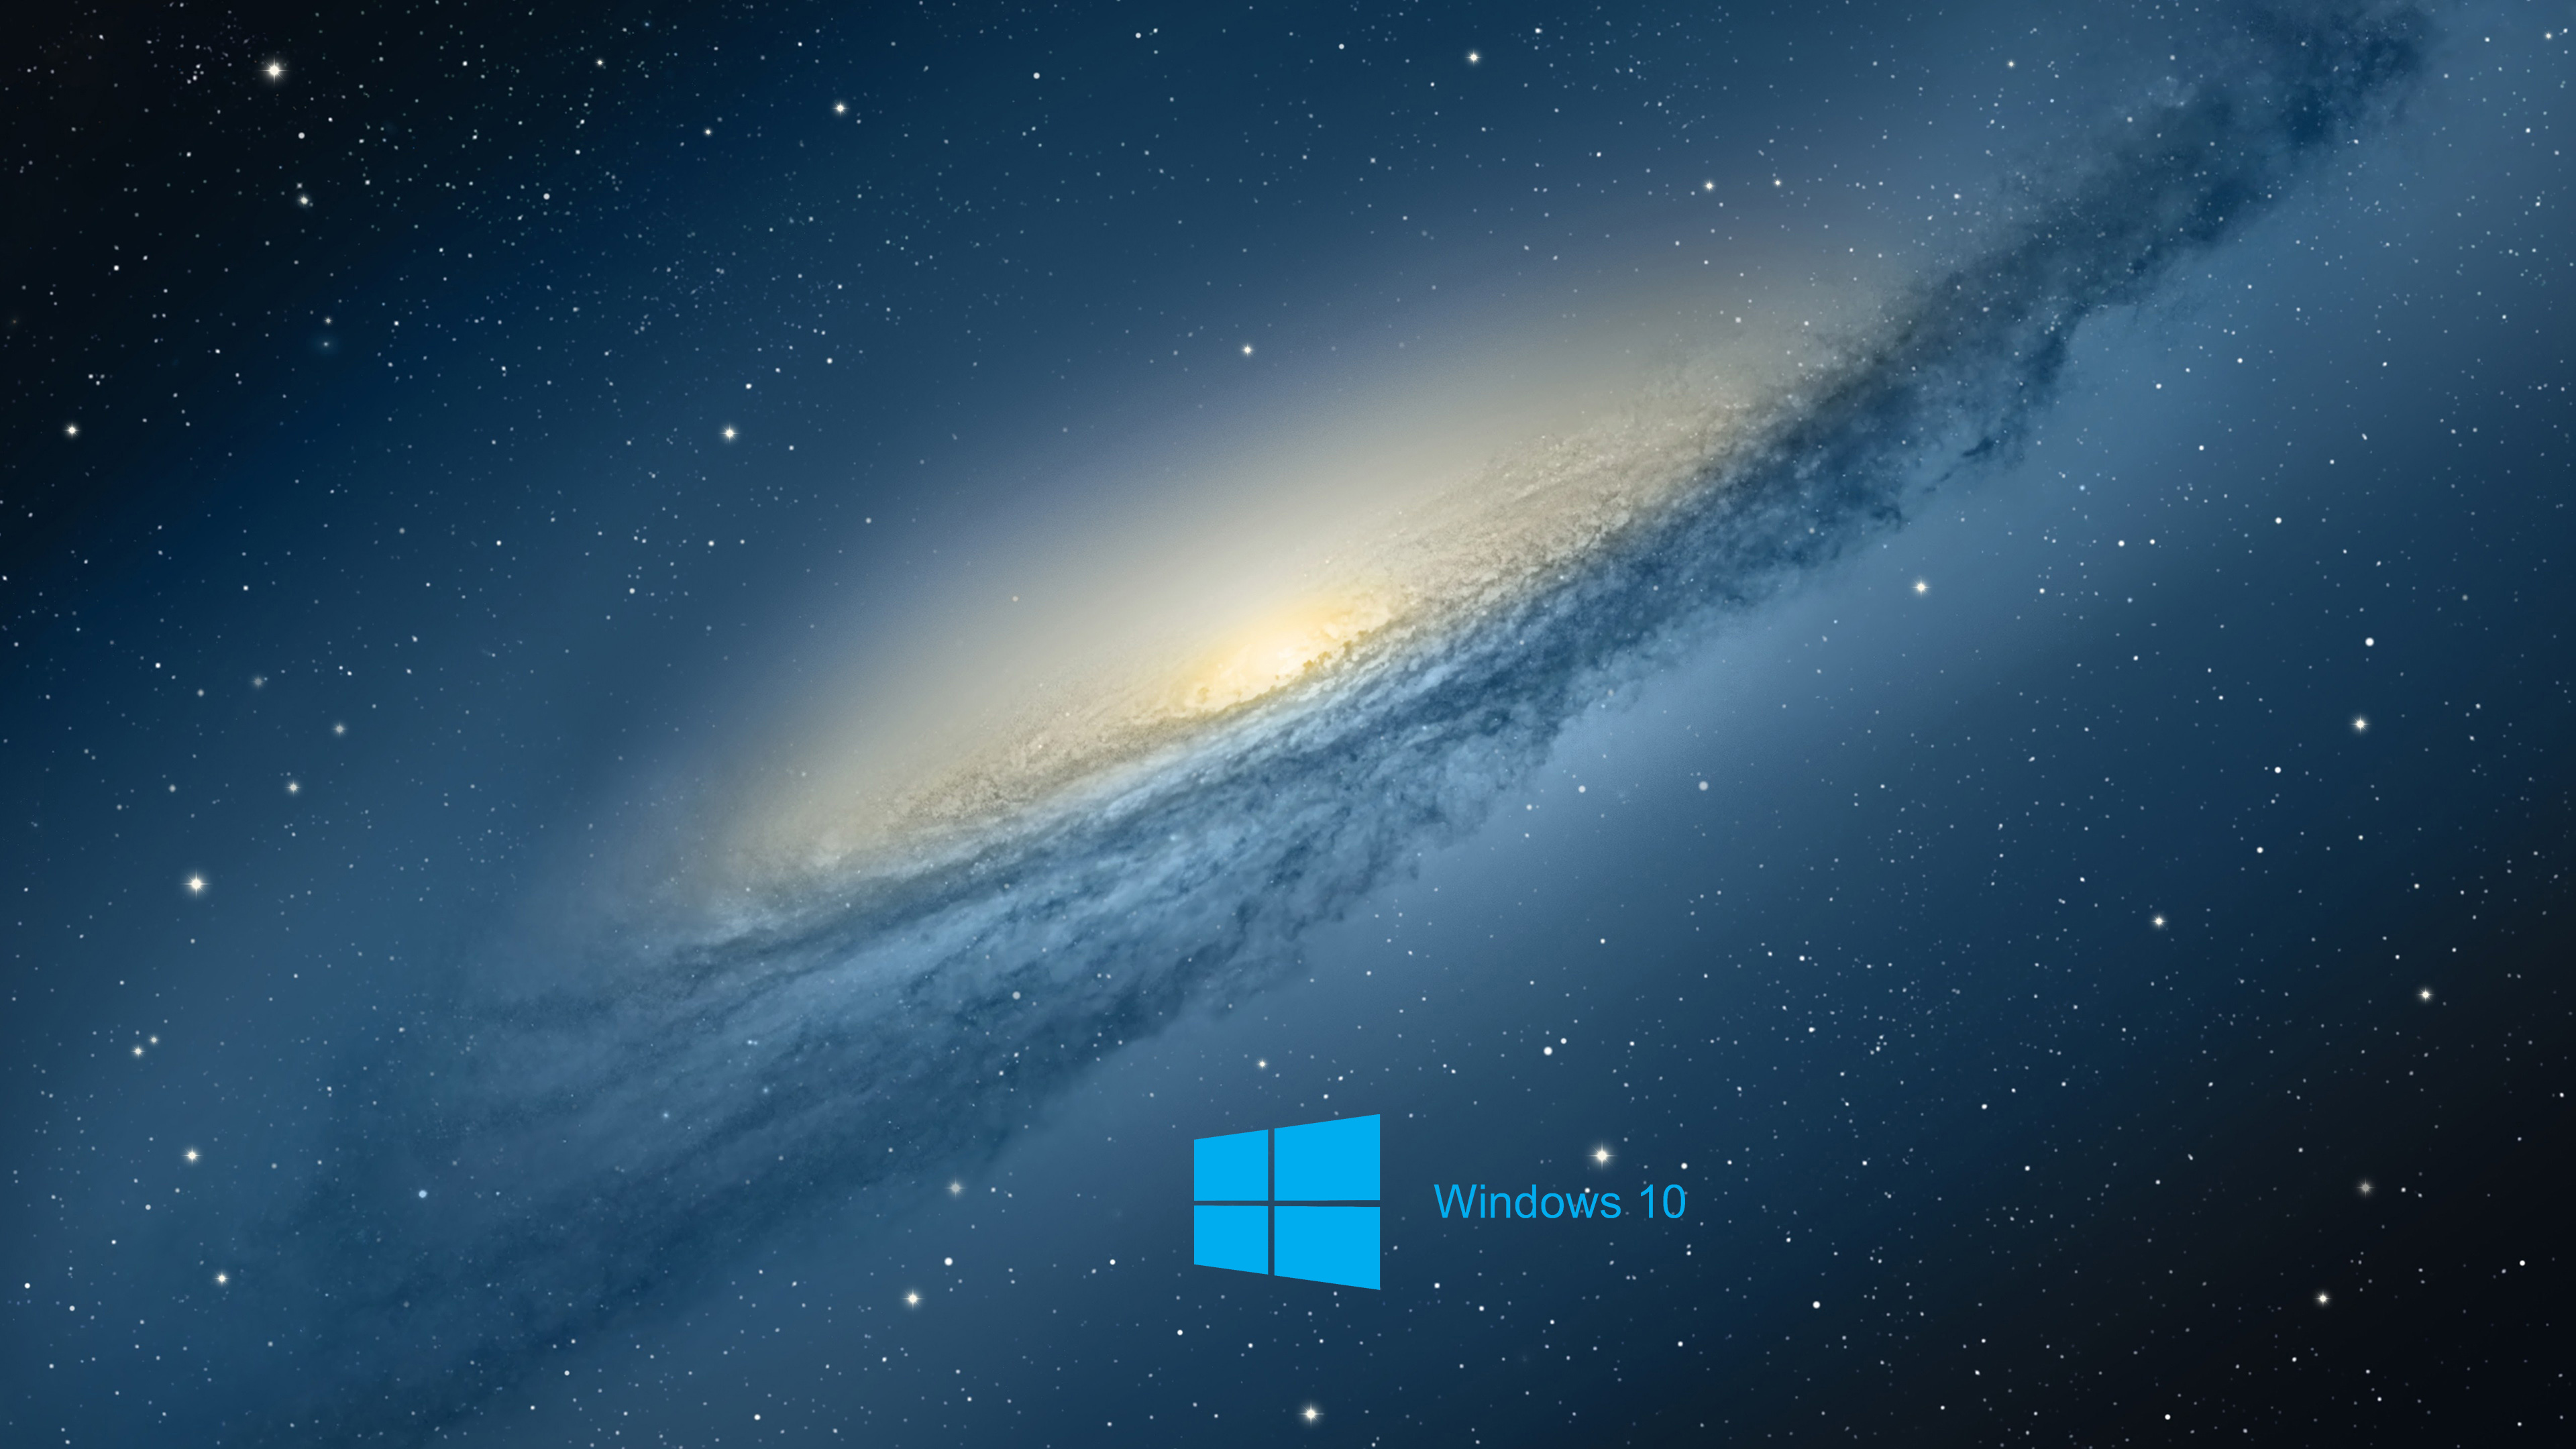 download windows 10 background images